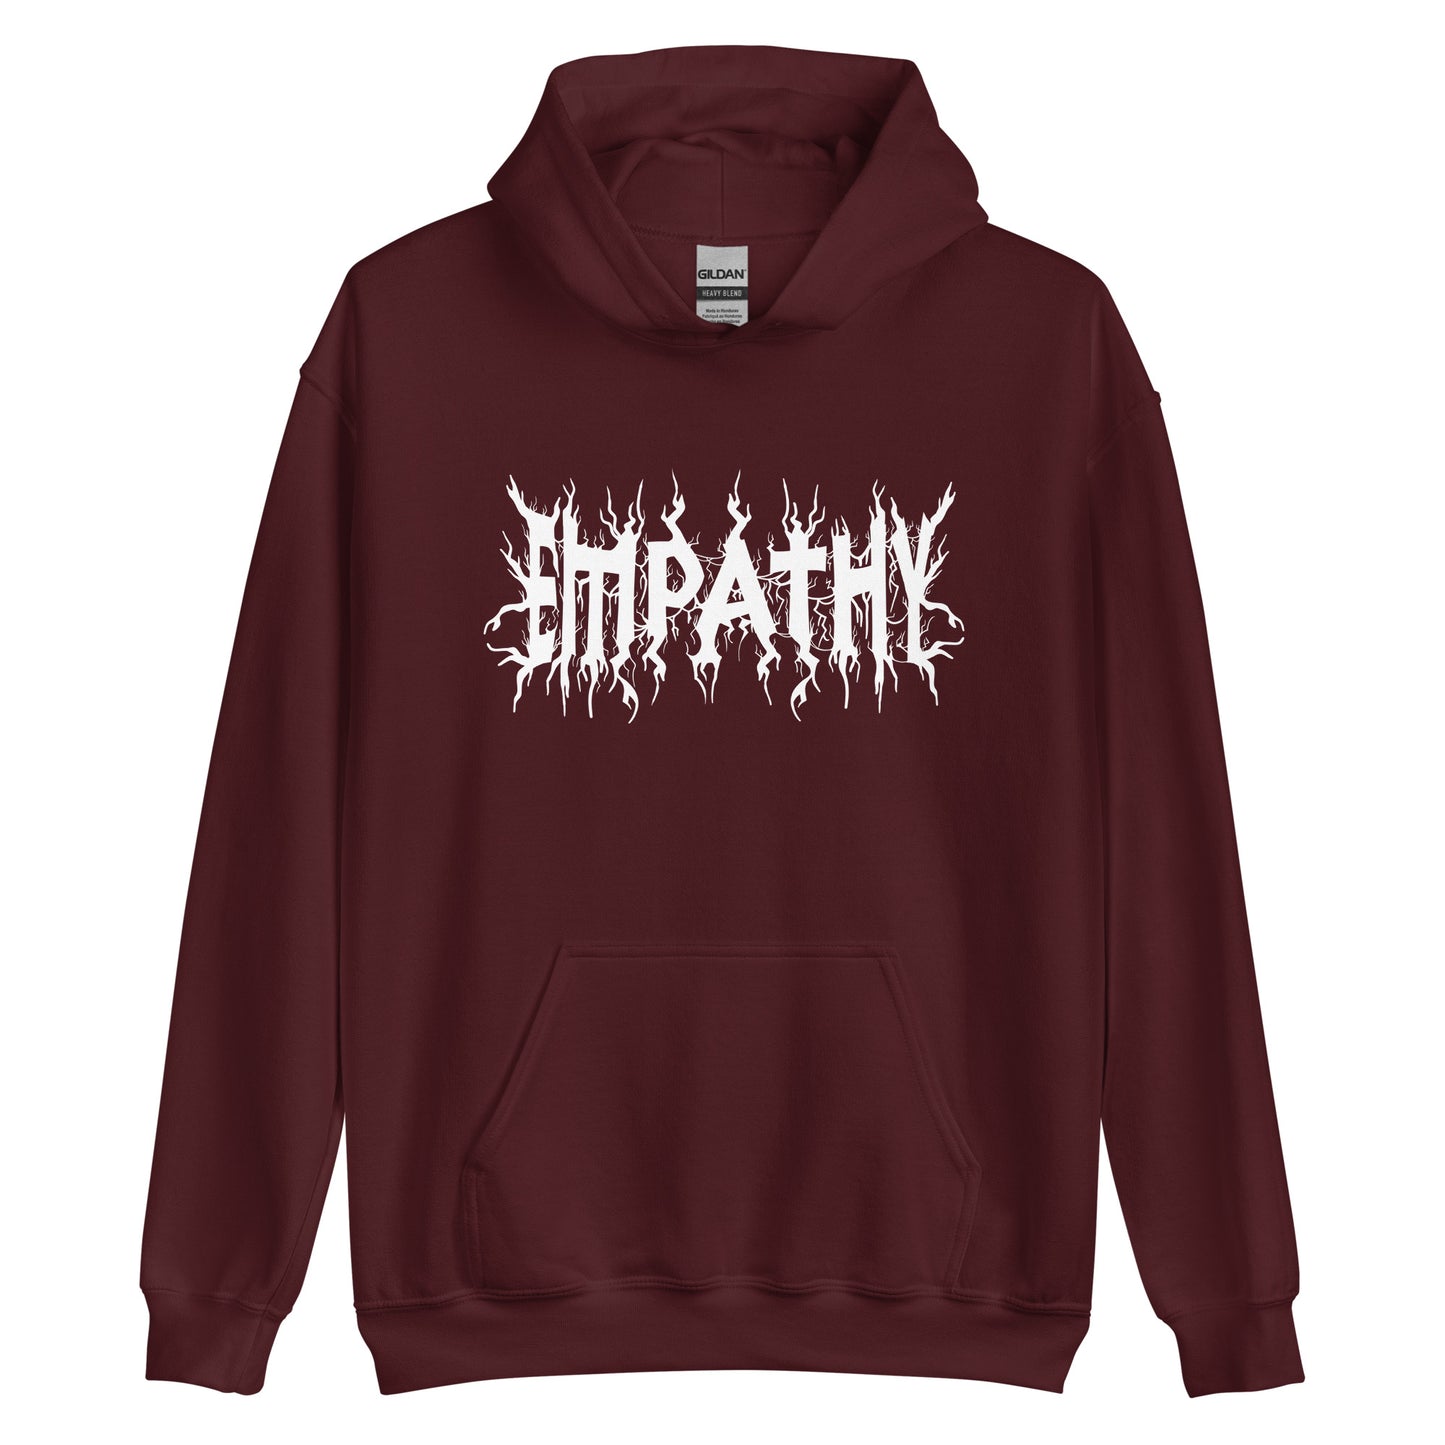 A maroon hooded sweatshirt featuring white text that reads "Empathy" in a jagged font  in the style of heavy metal band shirts